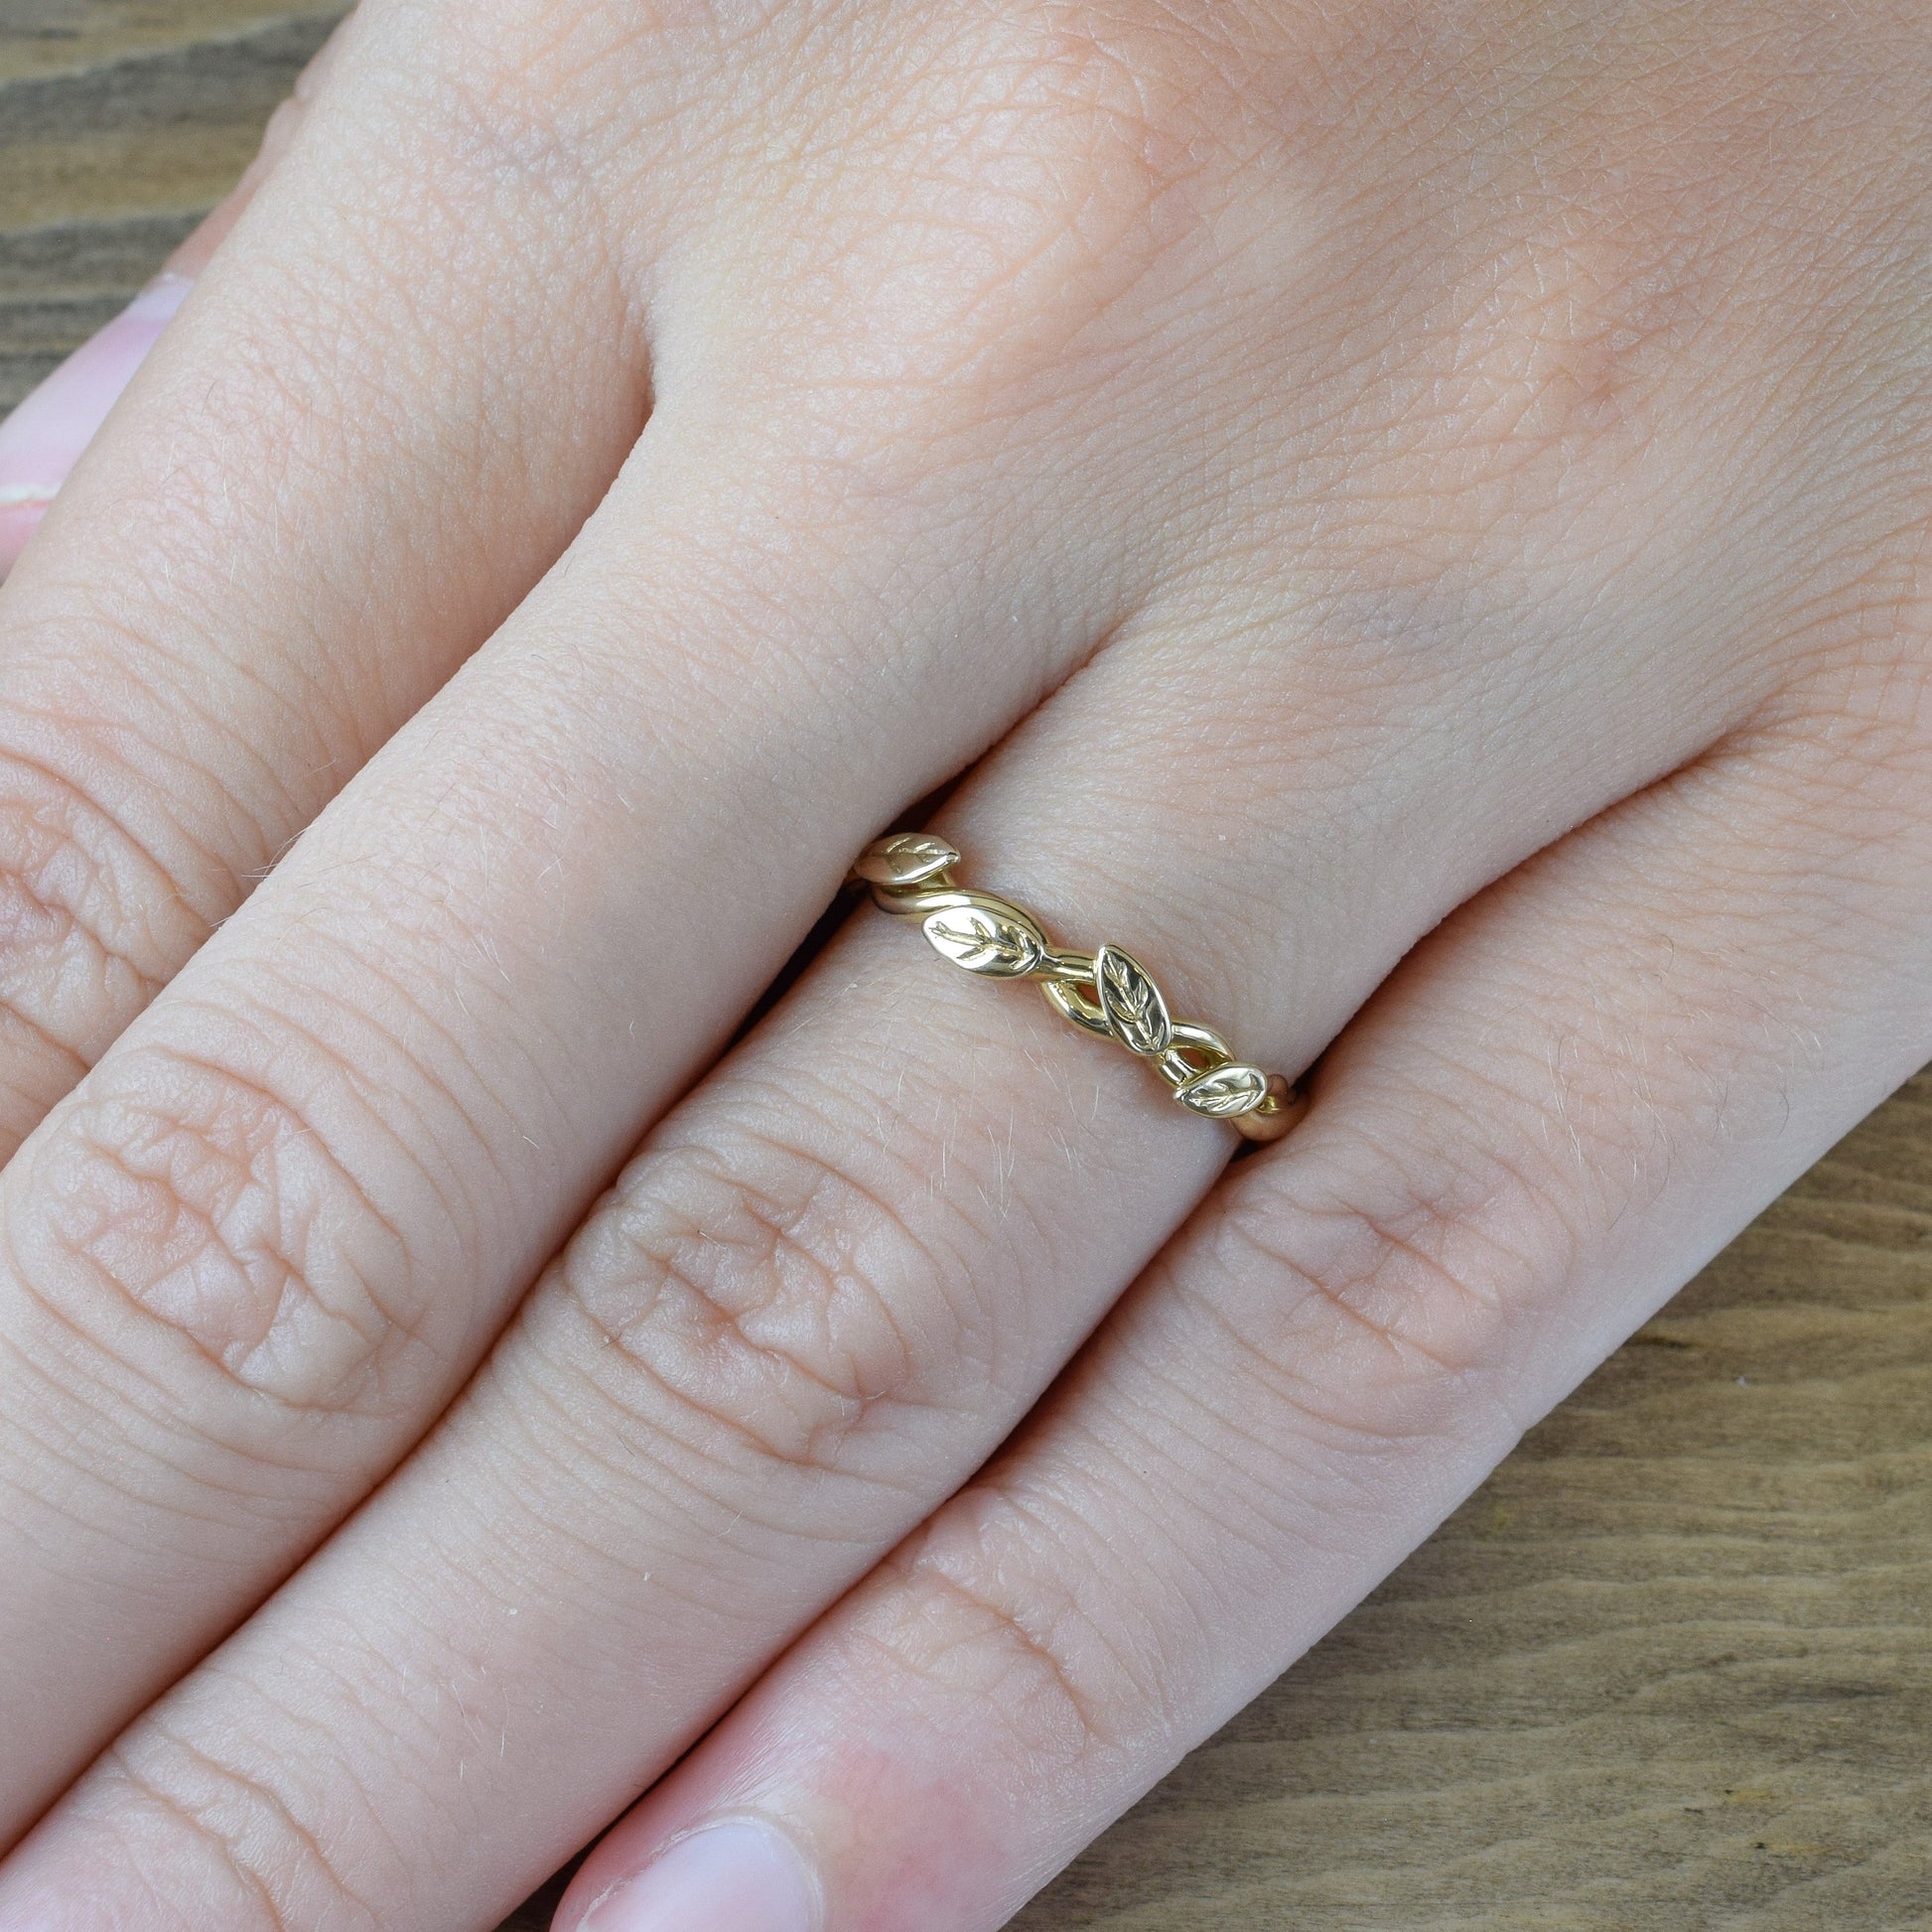 Nature inspired ring with leaves in yellow gold on finger